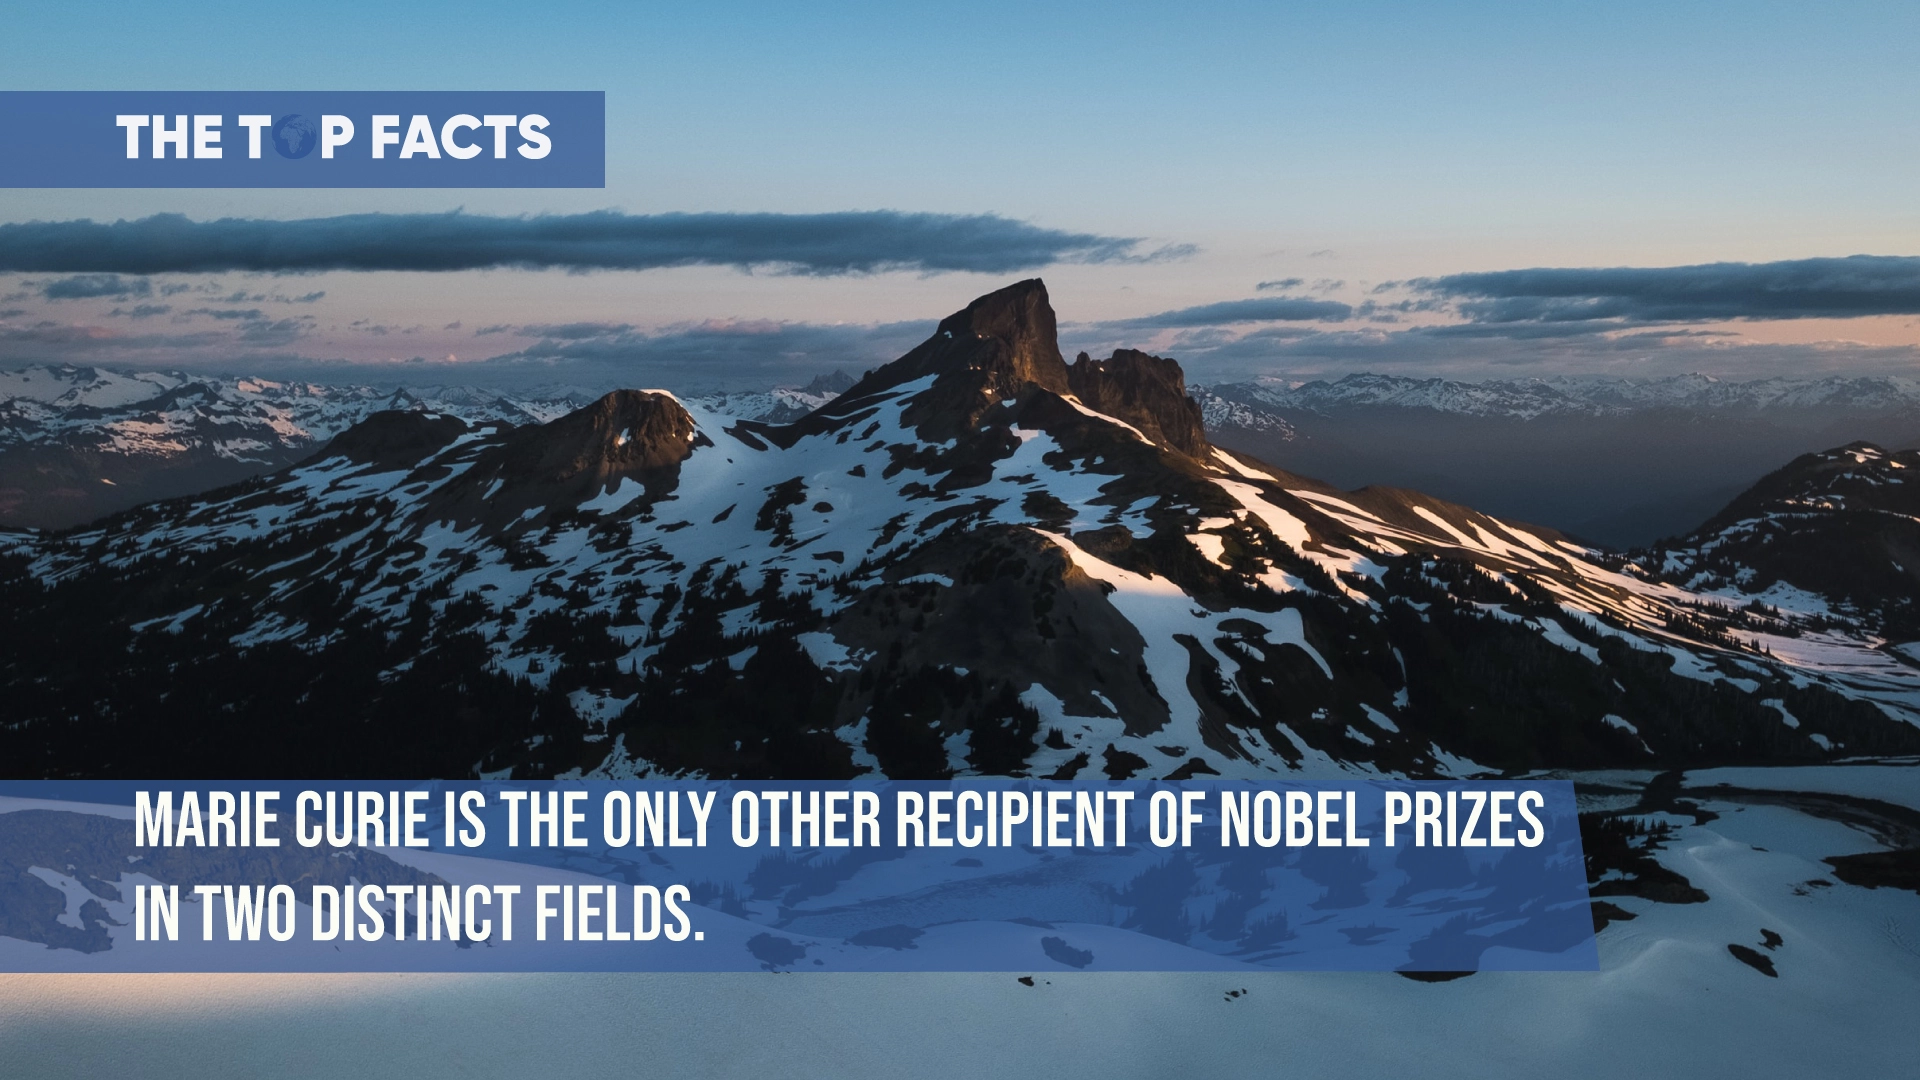 Marie Curie is the only other recipient of Nobel prizes in two distinct fields